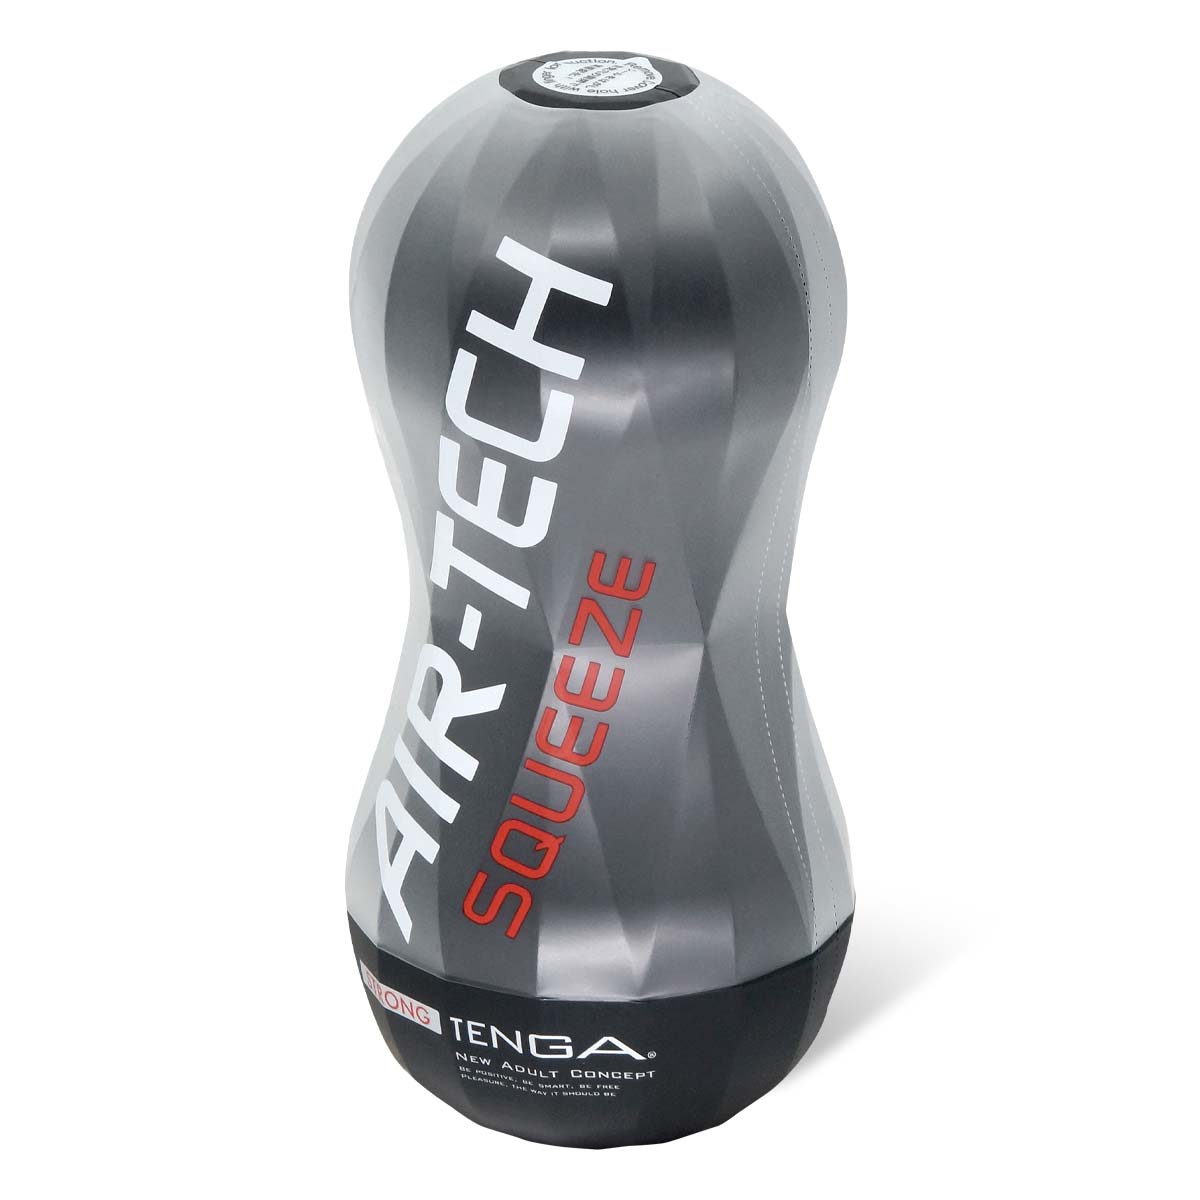 TENGA AIR-TECH SQUEEZE REUSABLE VACUUM CUP STRONG Pocket Pussy-p_1